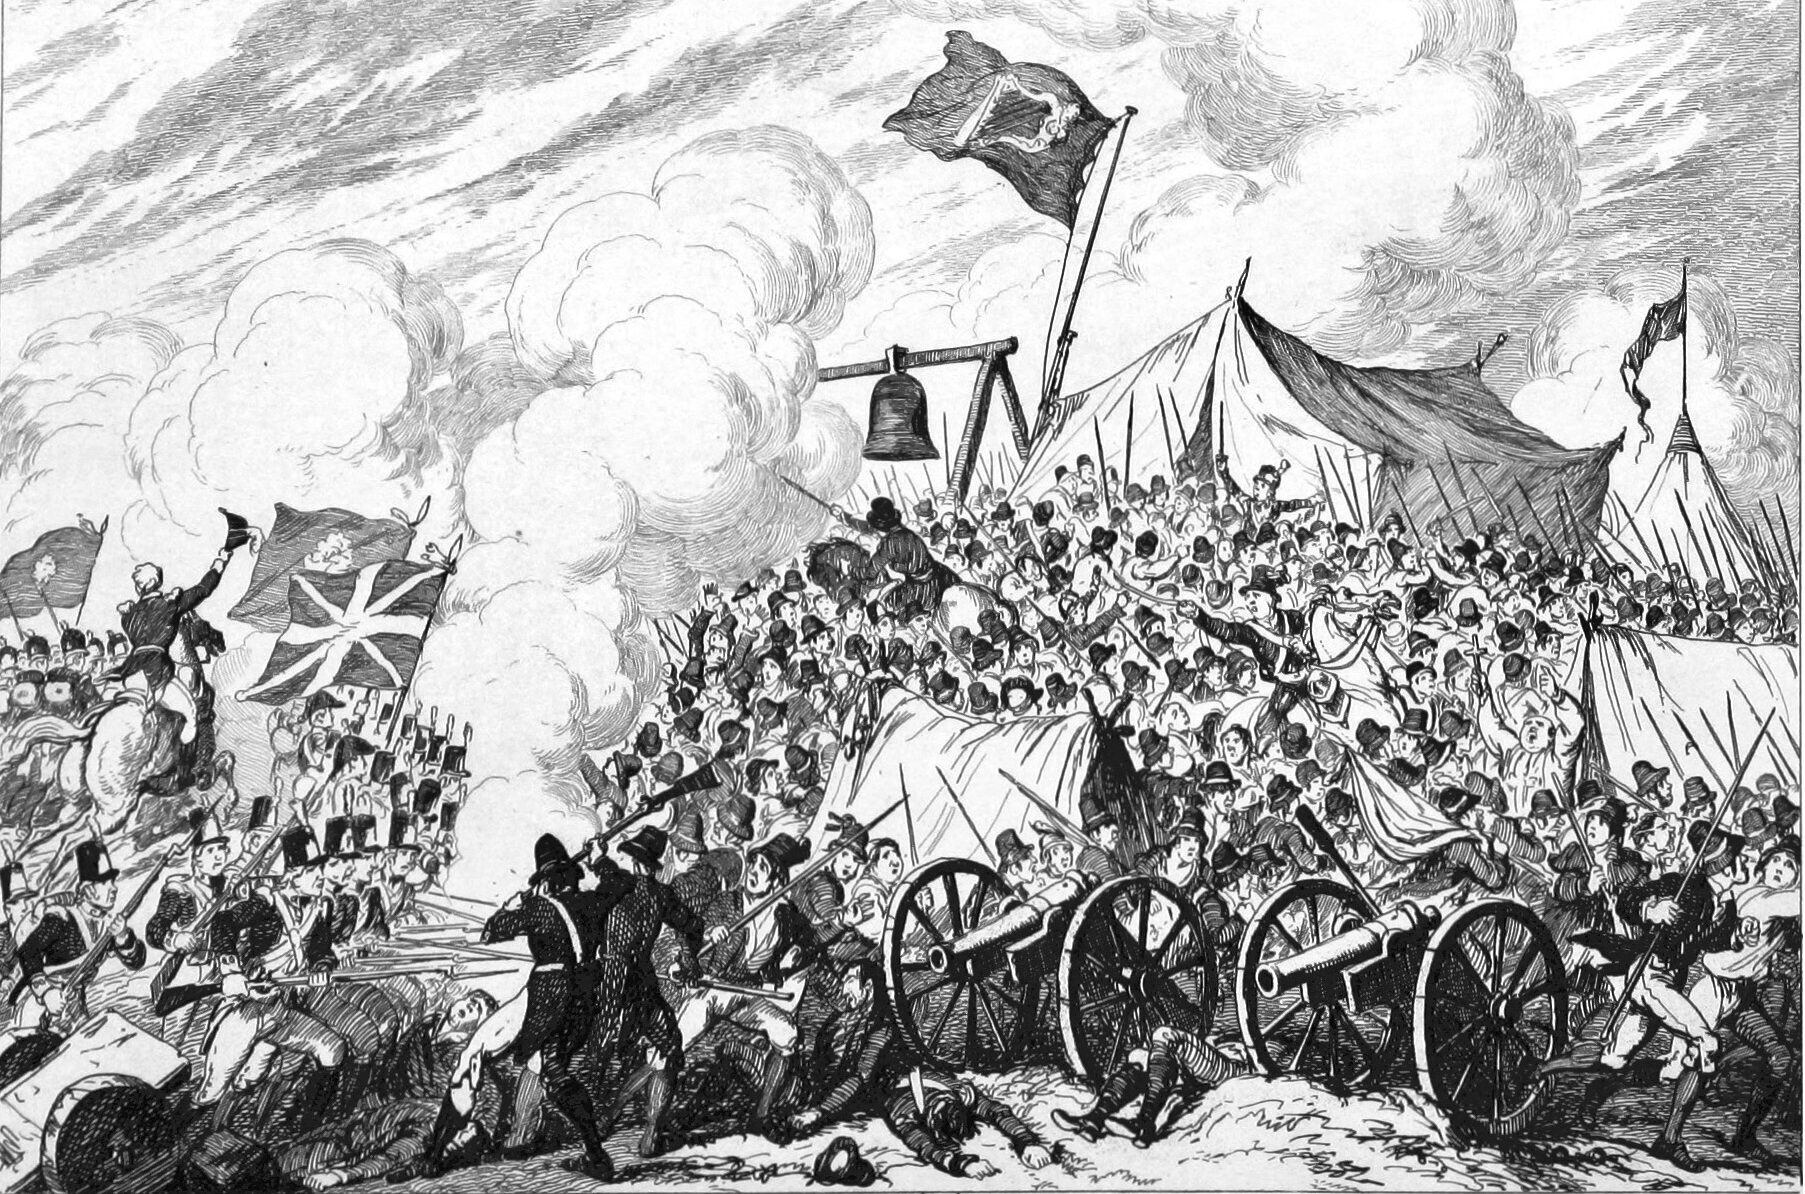 Poorly armed and led, the United Irishmen were unable to break British lines at Vinegar Hill.